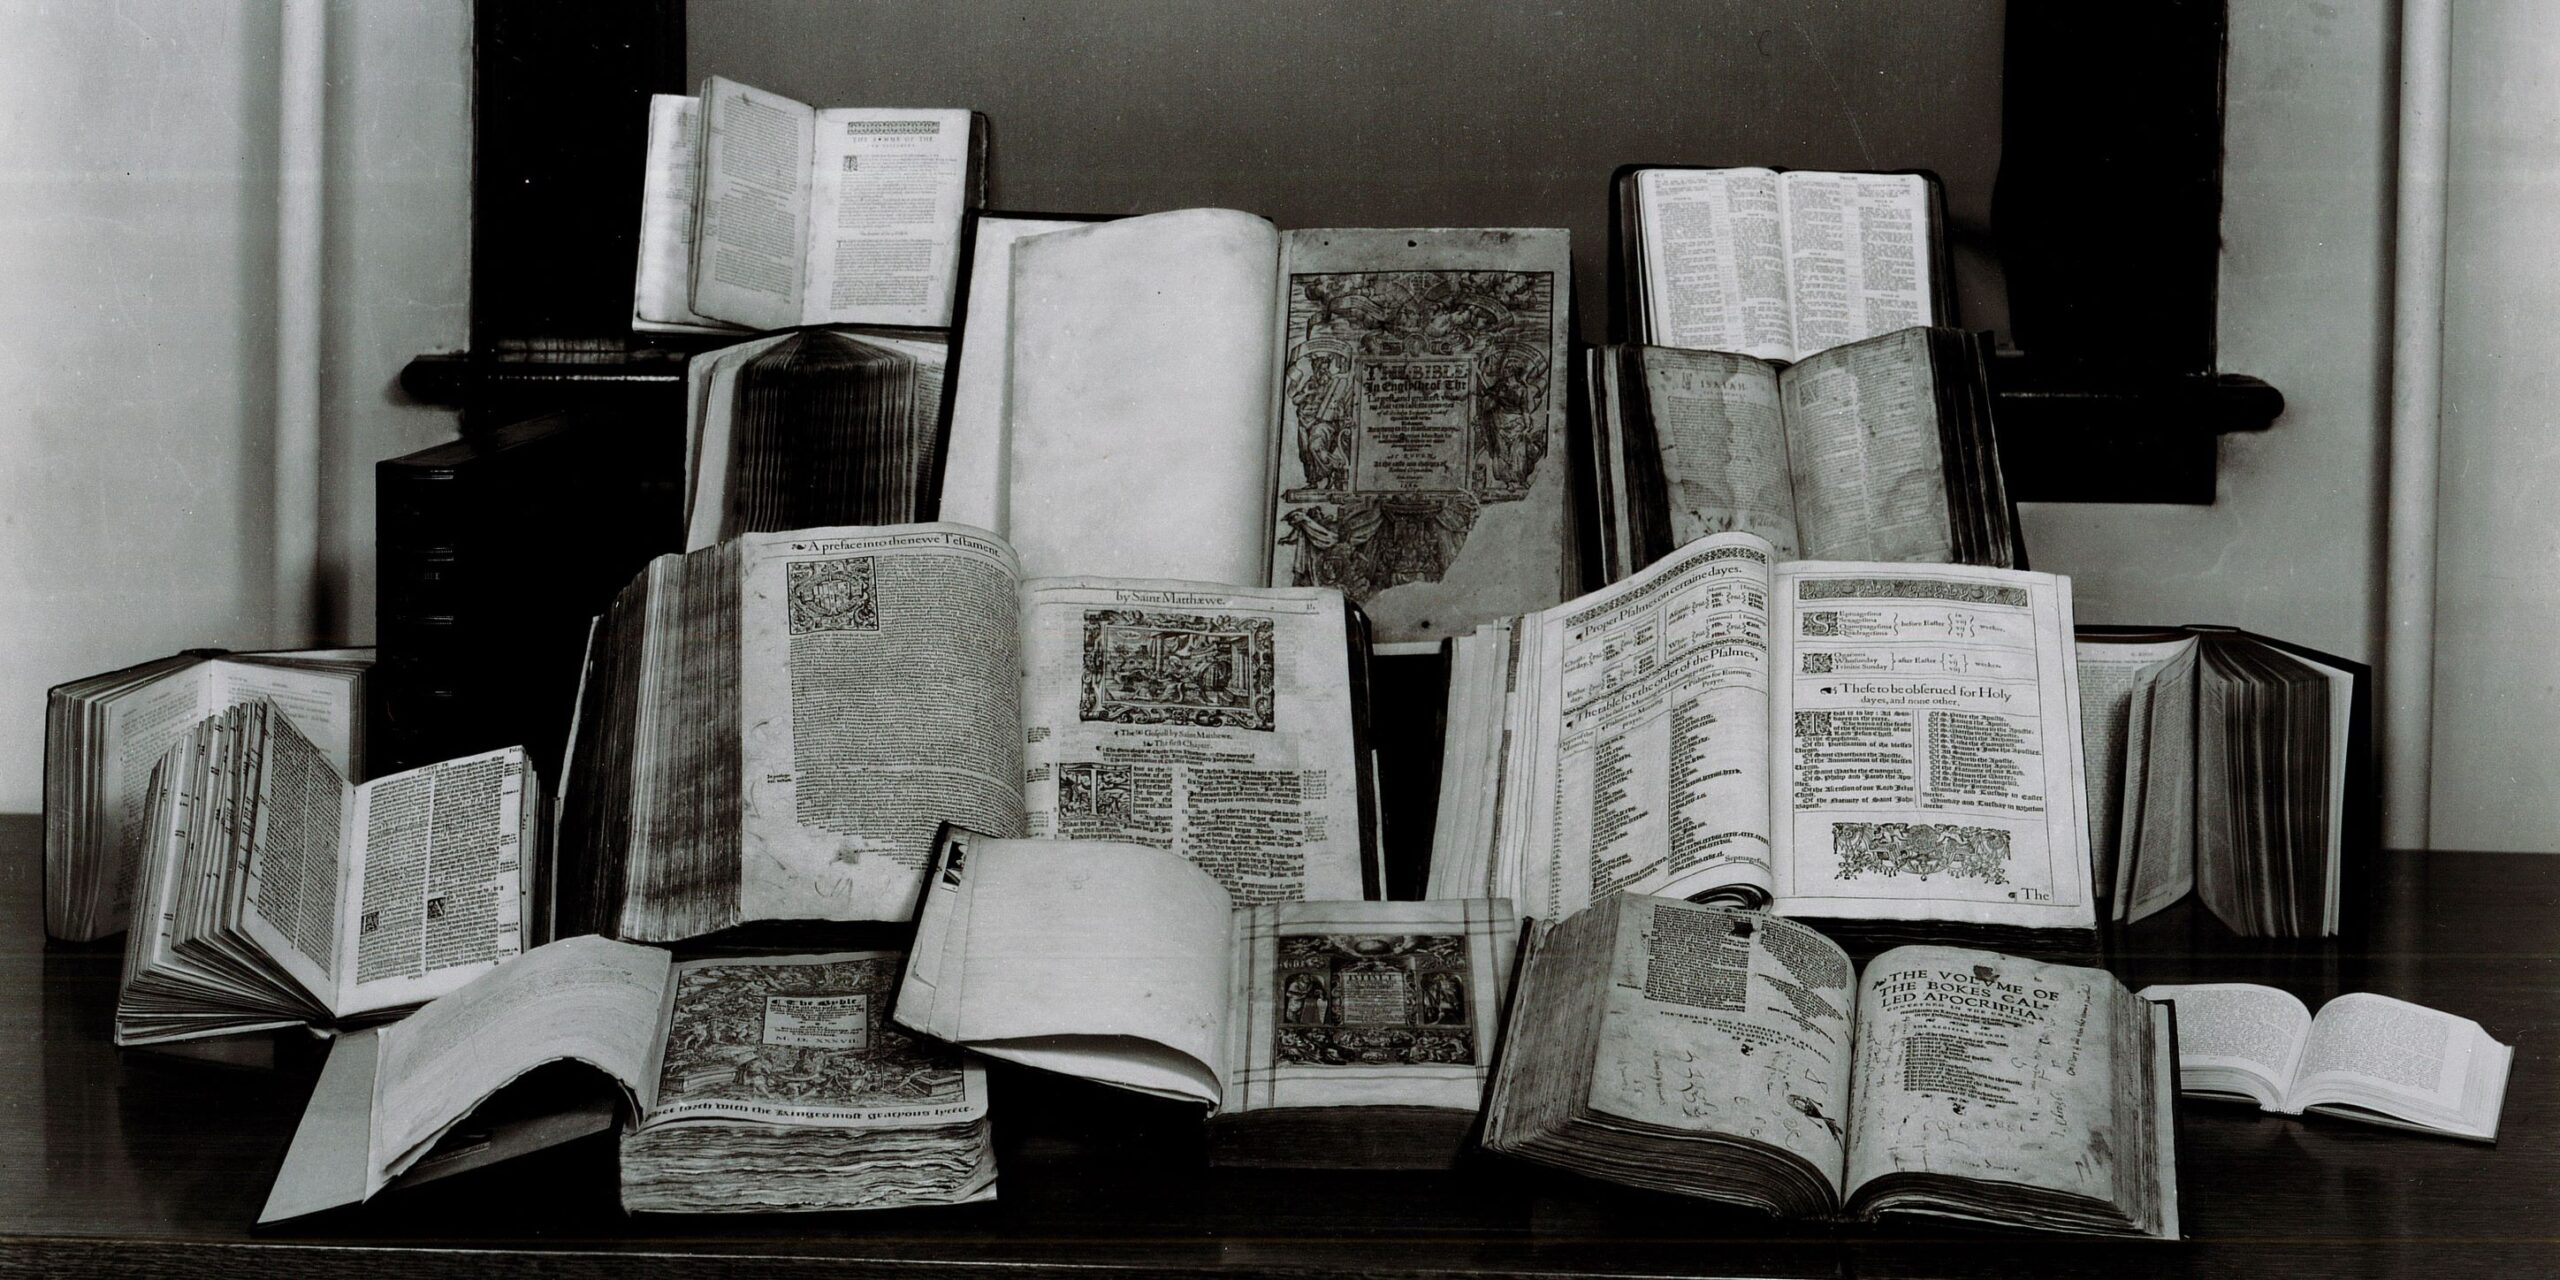 Black and White photo of some of Styberg's rare bibles on display